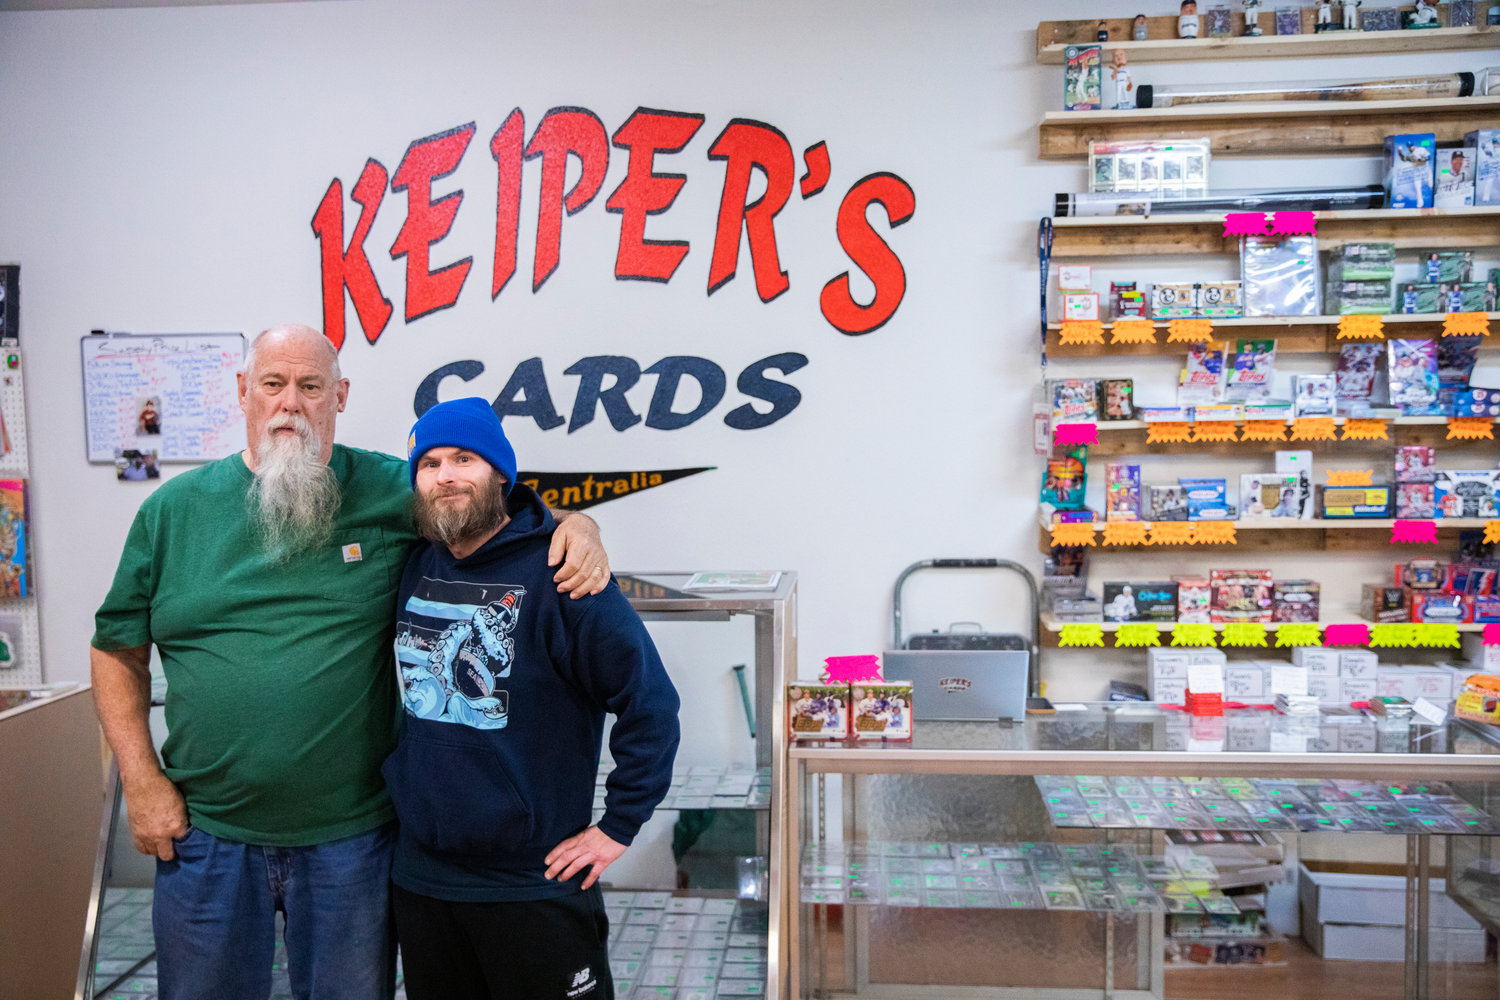 Charlie Redmon and Dan Keiper pose for a photo inside Keiper’s Cards in downtown Centralia on Thursday.